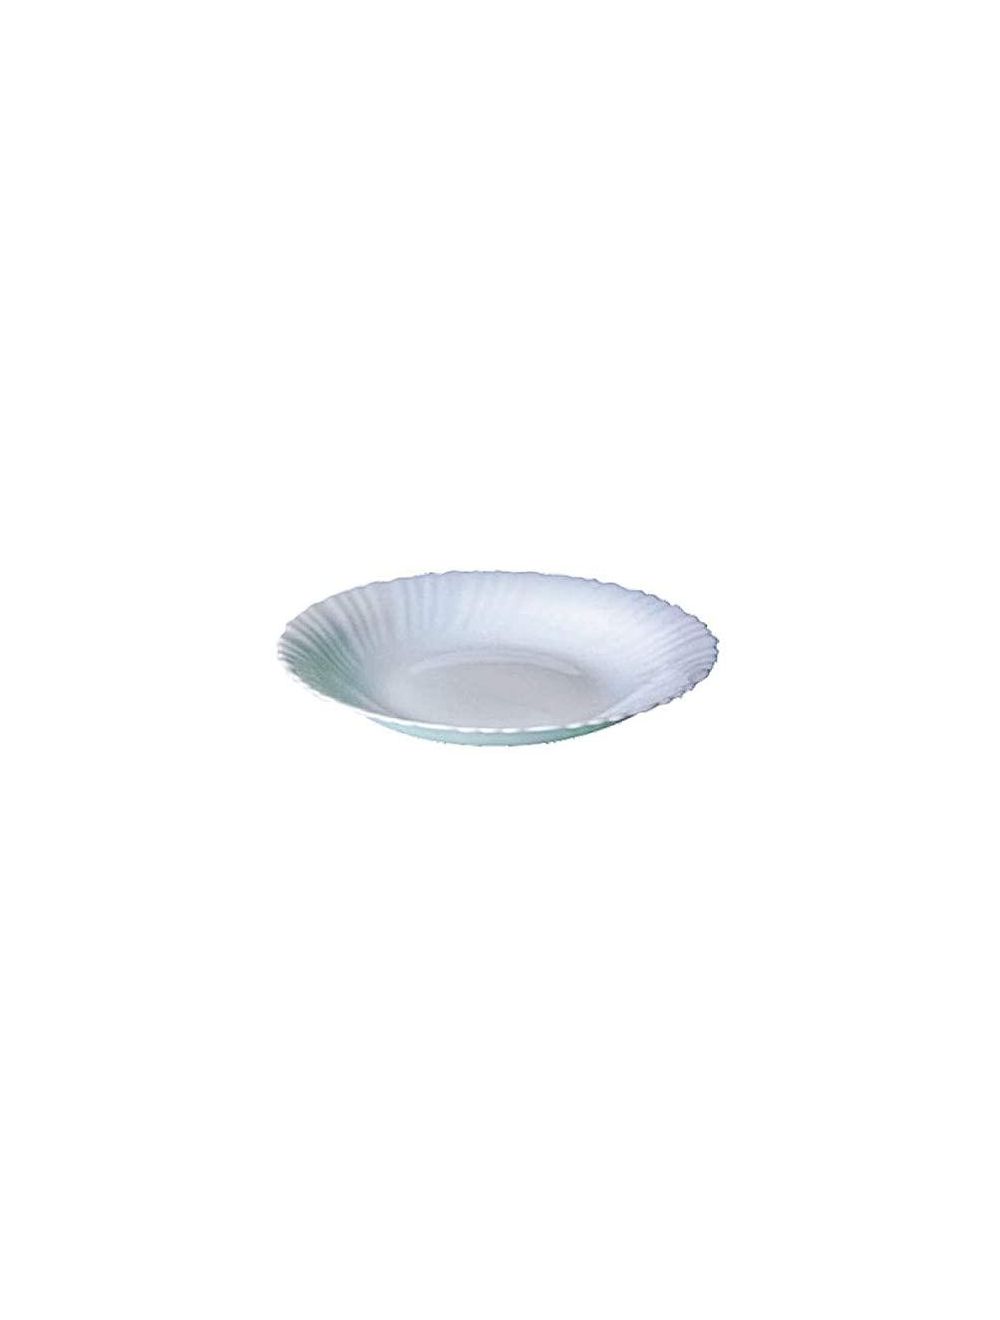 Royalford RF5594 Opal ware Spin White Soup Plate, 8.5 Inch